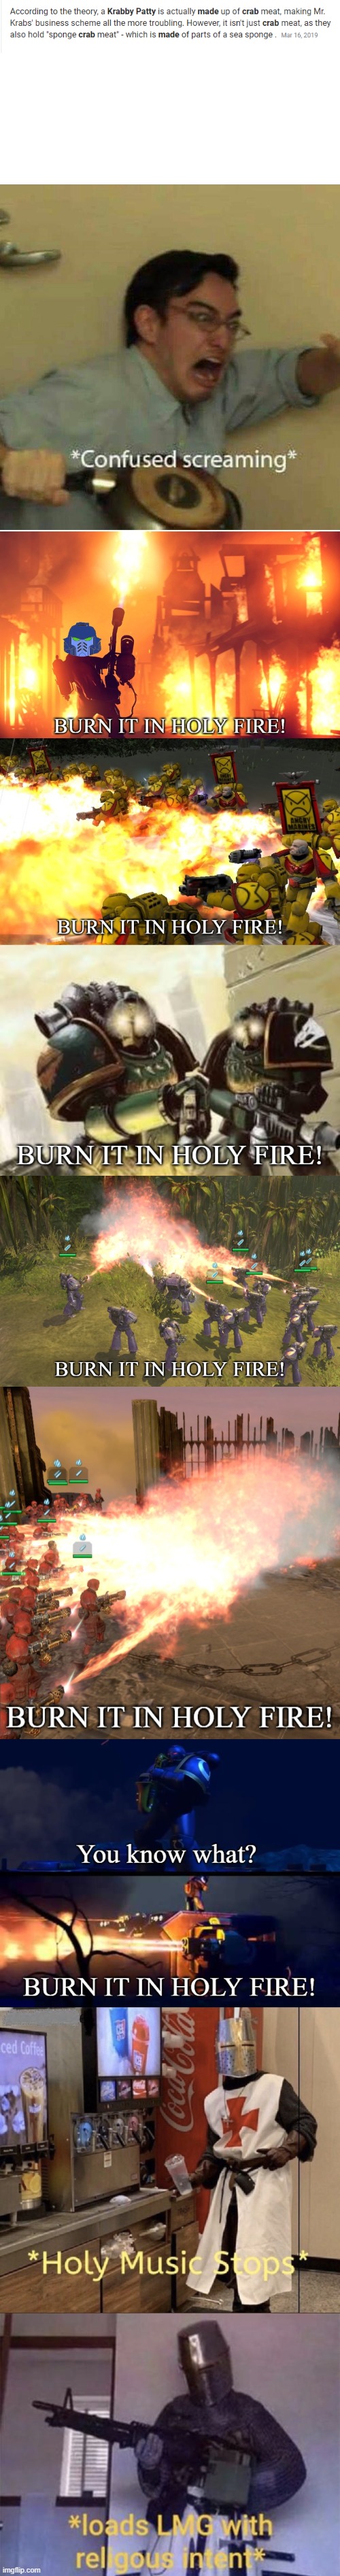 OH GOD | image tagged in confused screaming,loads lmg with religious intent,holy music stops,burn it in holy fire 1,burn it in holy fire 2,burn it in hol | made w/ Imgflip meme maker